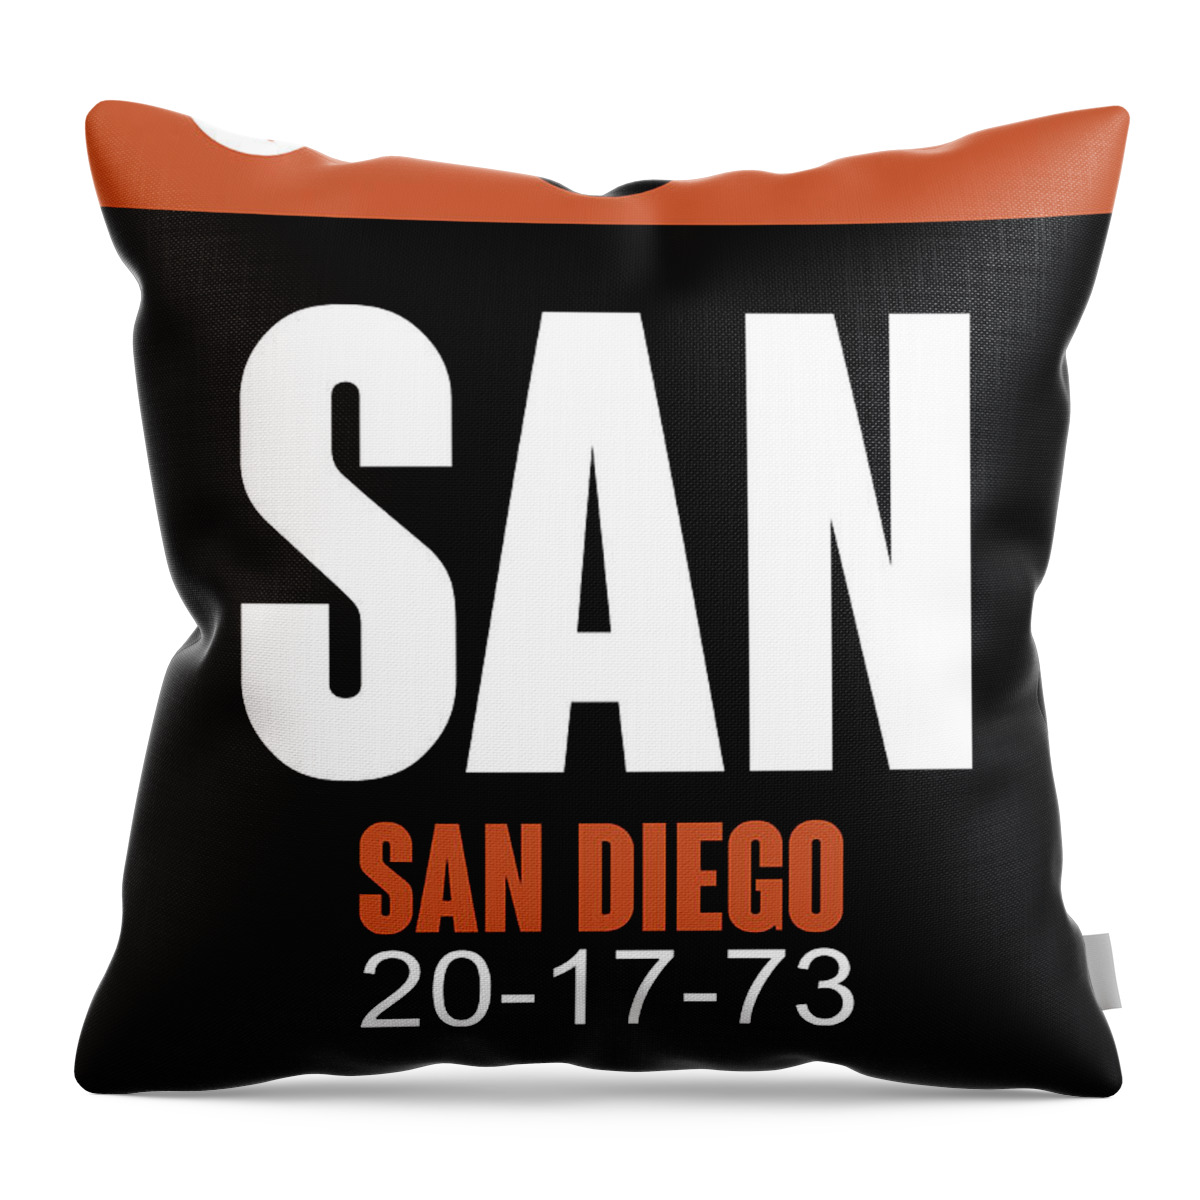 San Diego Throw Pillow featuring the digital art San Diego Airport Poster 3 by Naxart Studio